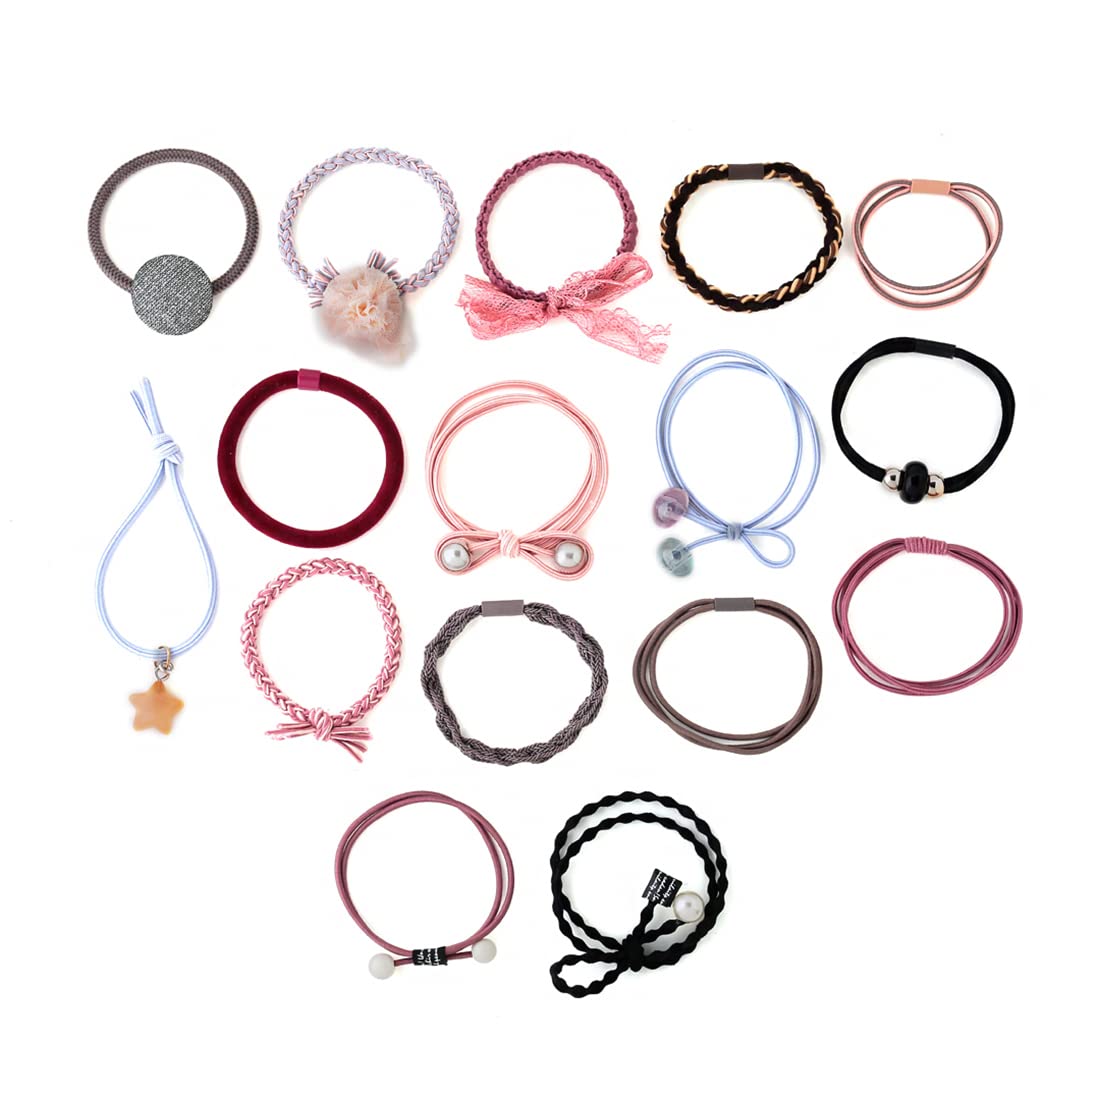 Yellow Chimes Rubber Bands for Women Hair Accessories for Women Hair Rubber Band Multicolor 16 Pcs Elastic Hair Rubber Bands for Women Hair Ties Ponytail Holders with Storage Box Gift For Women and Grils